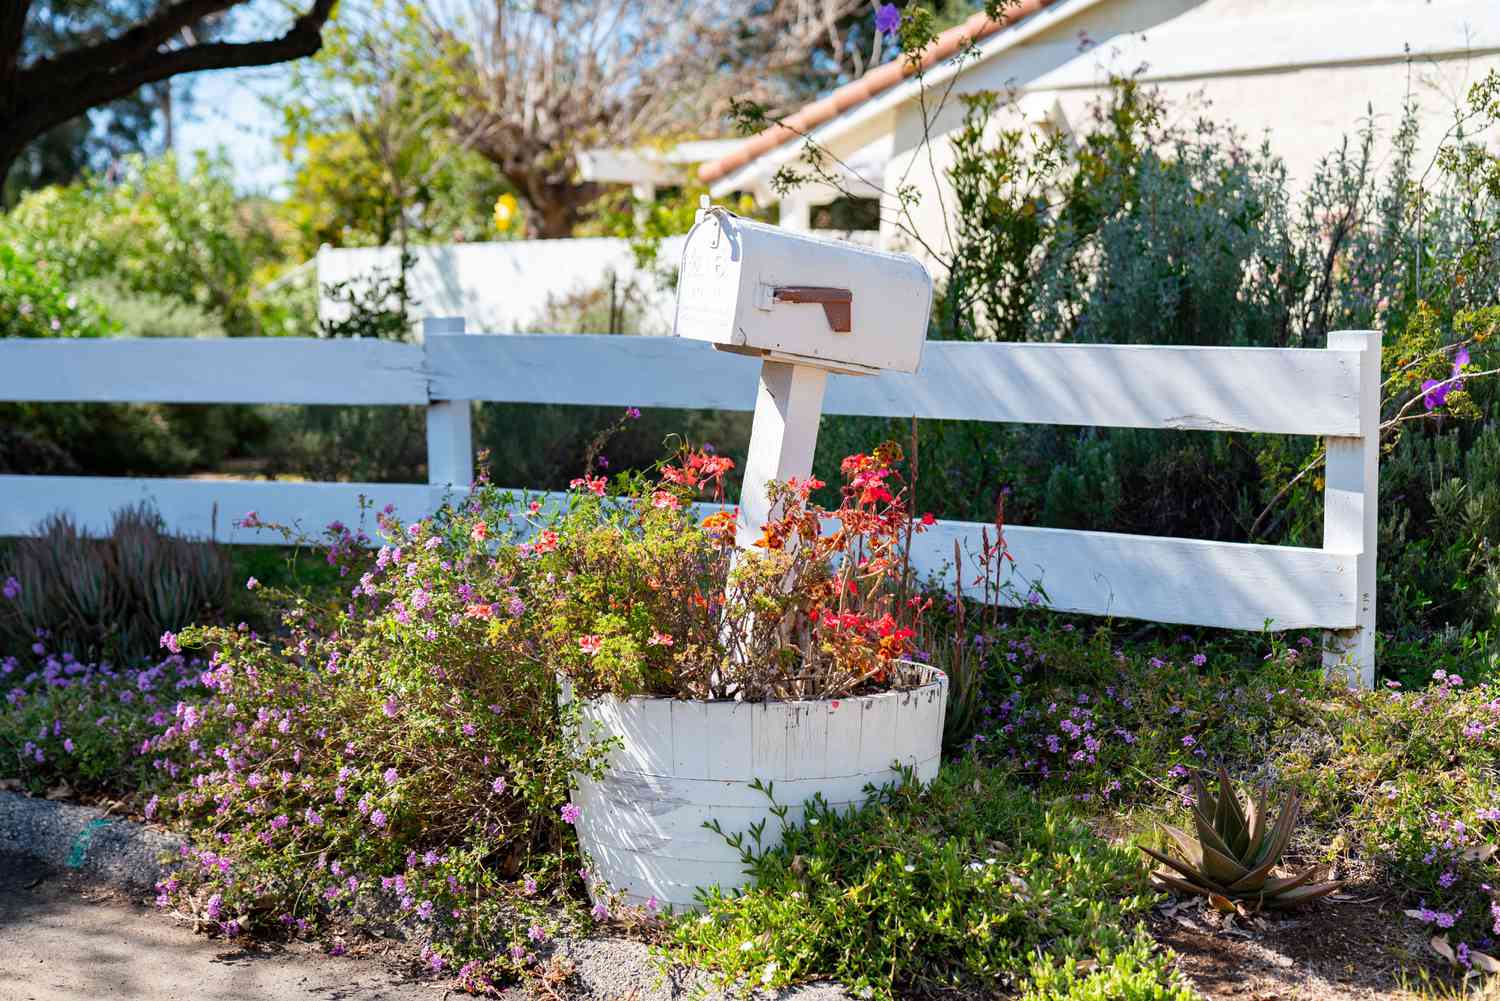 Mailbox surrounded by planted red and purple flowers